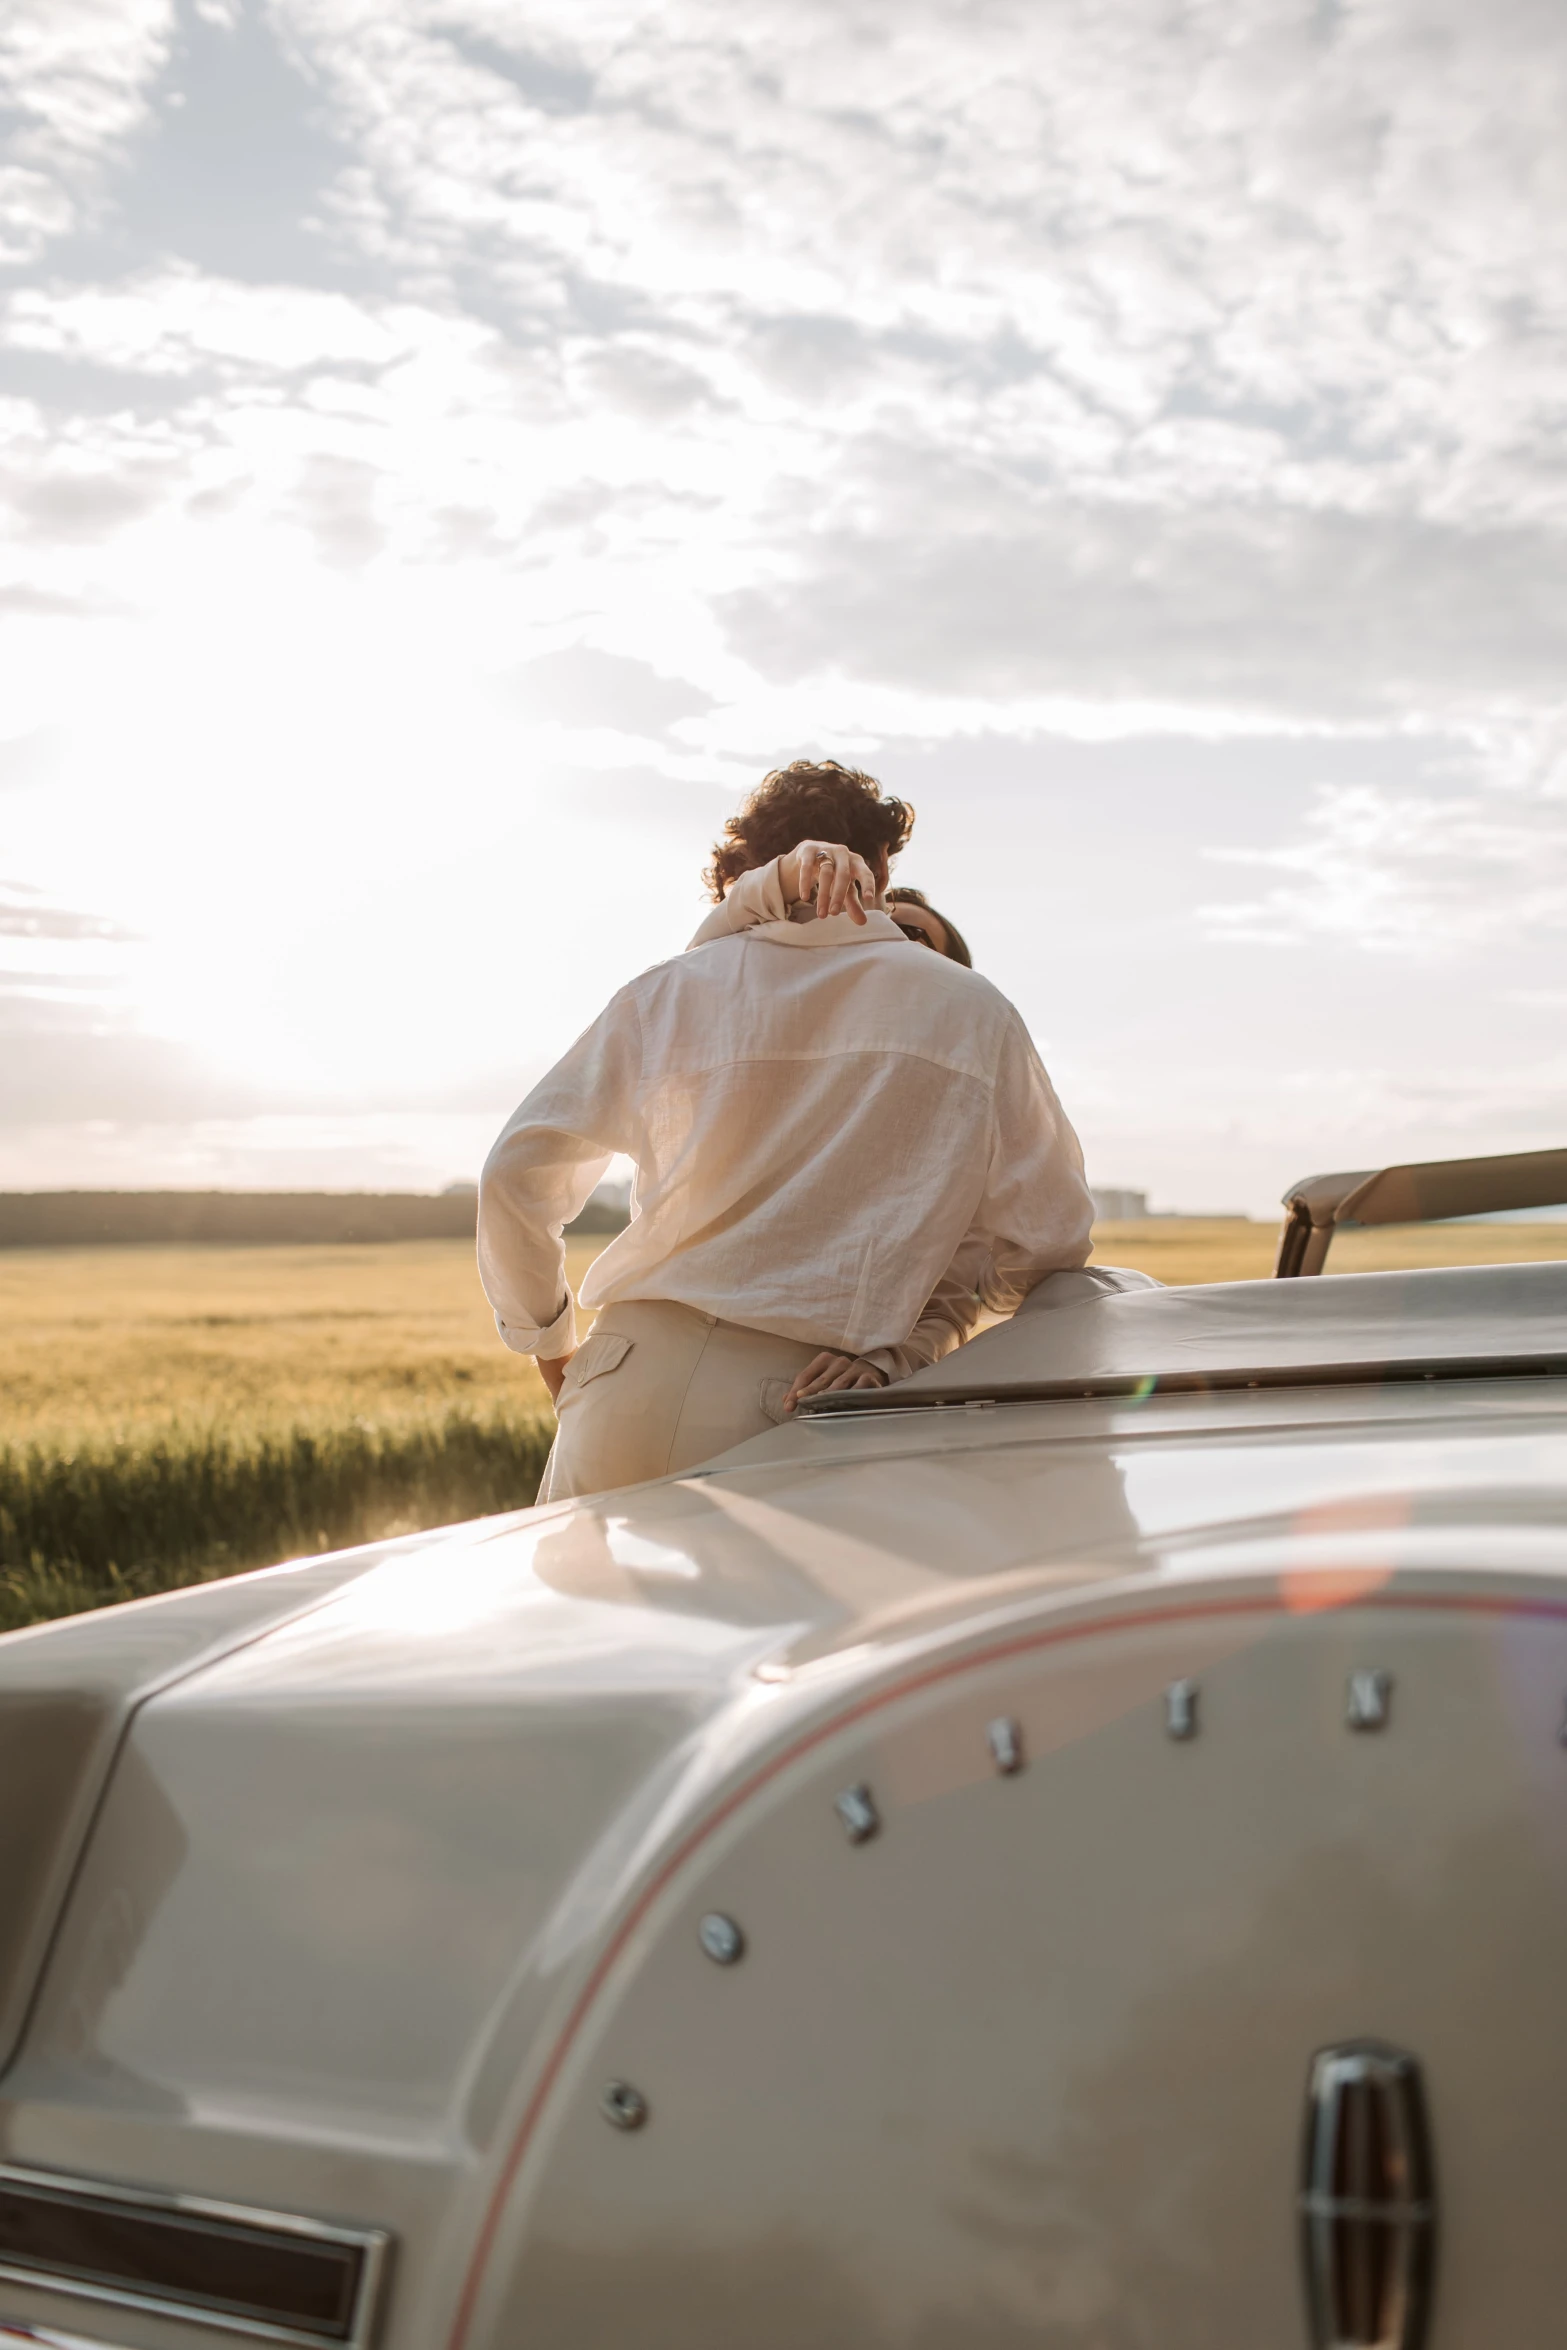 a woman sitting on the hood of a car, by Daniel Seghers, trending on unsplash, renaissance, in a wheat field, wearing a white button up shirt, private moment, conde nast traveler photo